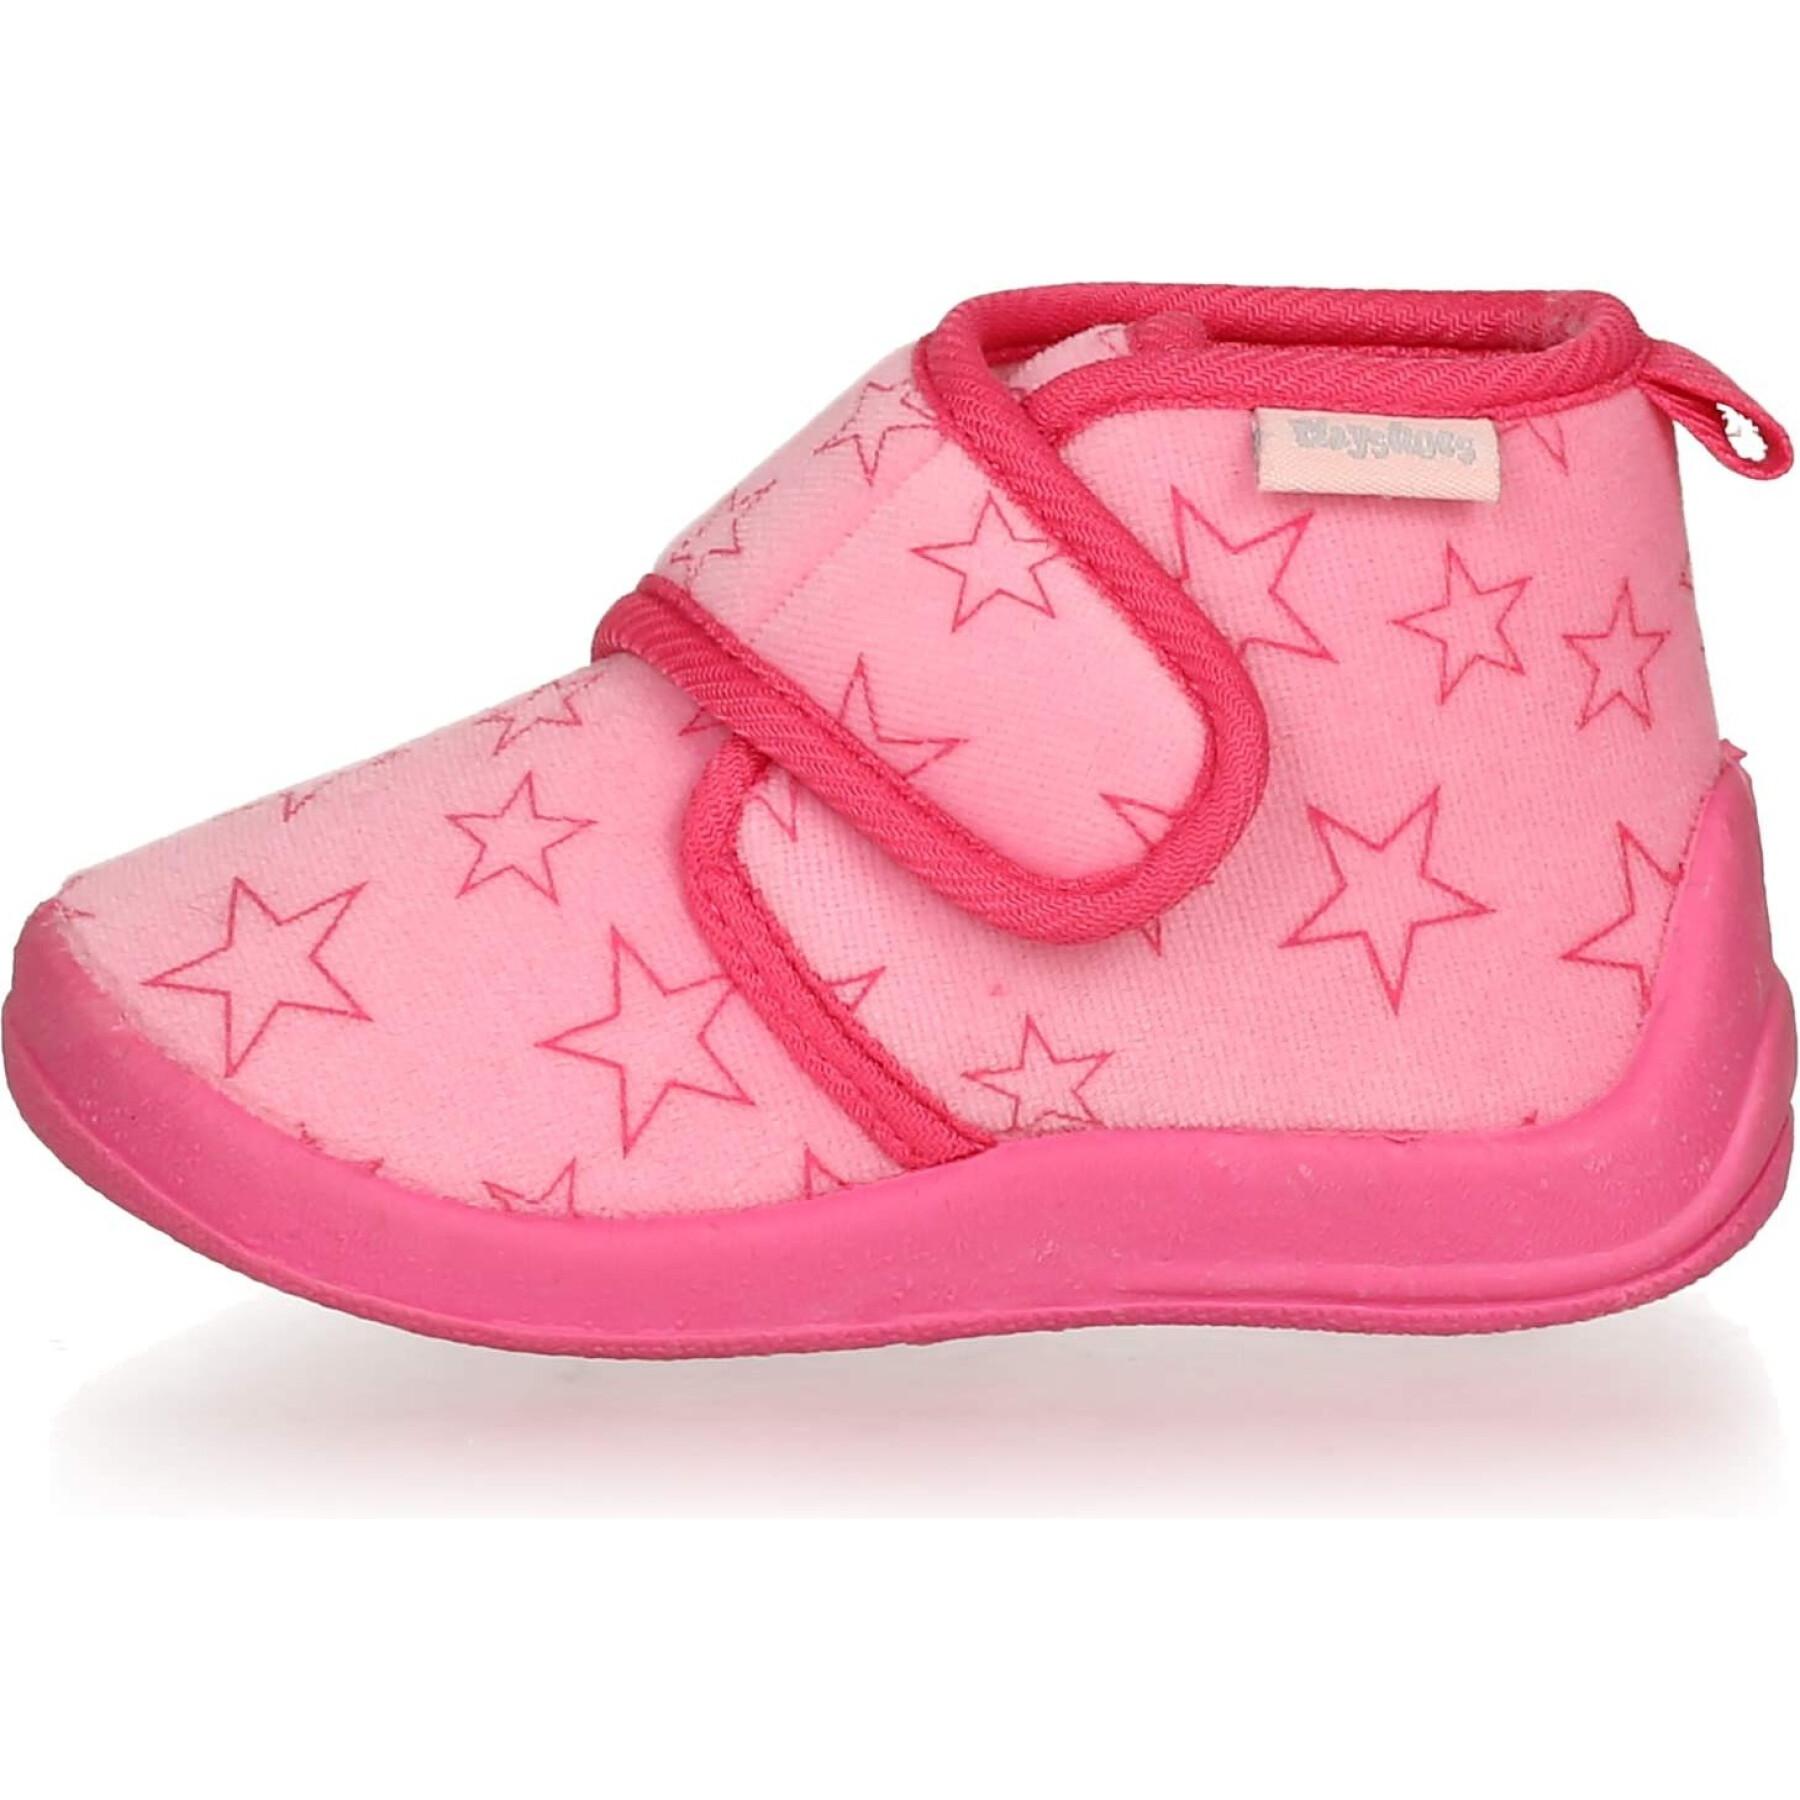 Chaussons fille Playshoes - Chaussons - Chaussures - Enfants